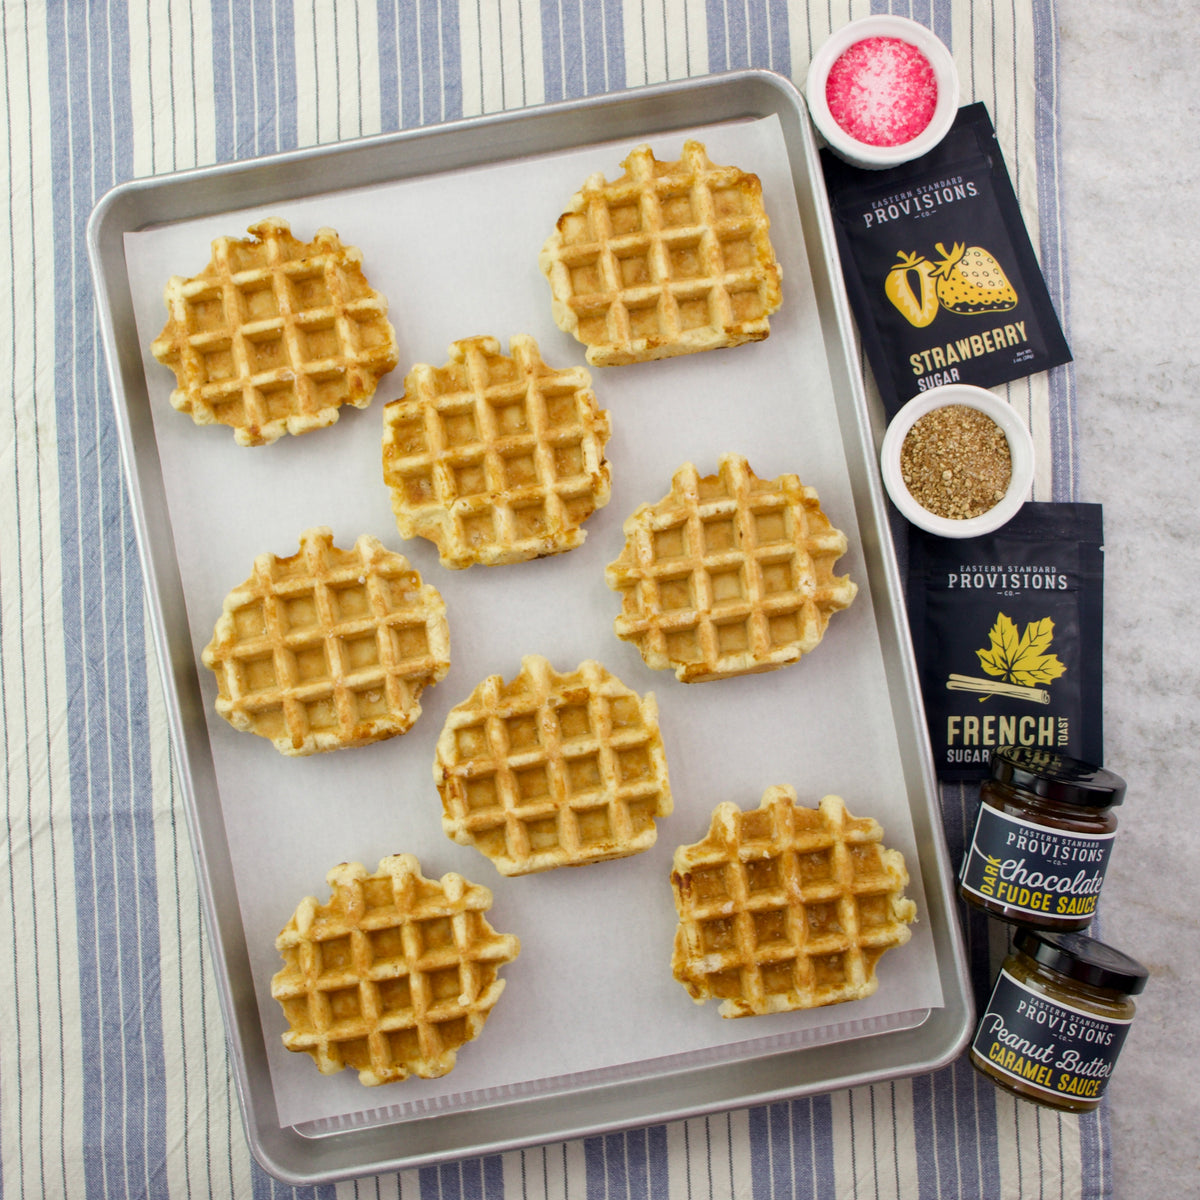 This Christmas Tree Waffle Maker Will Have You Waking Up for More Than Just  Gifts